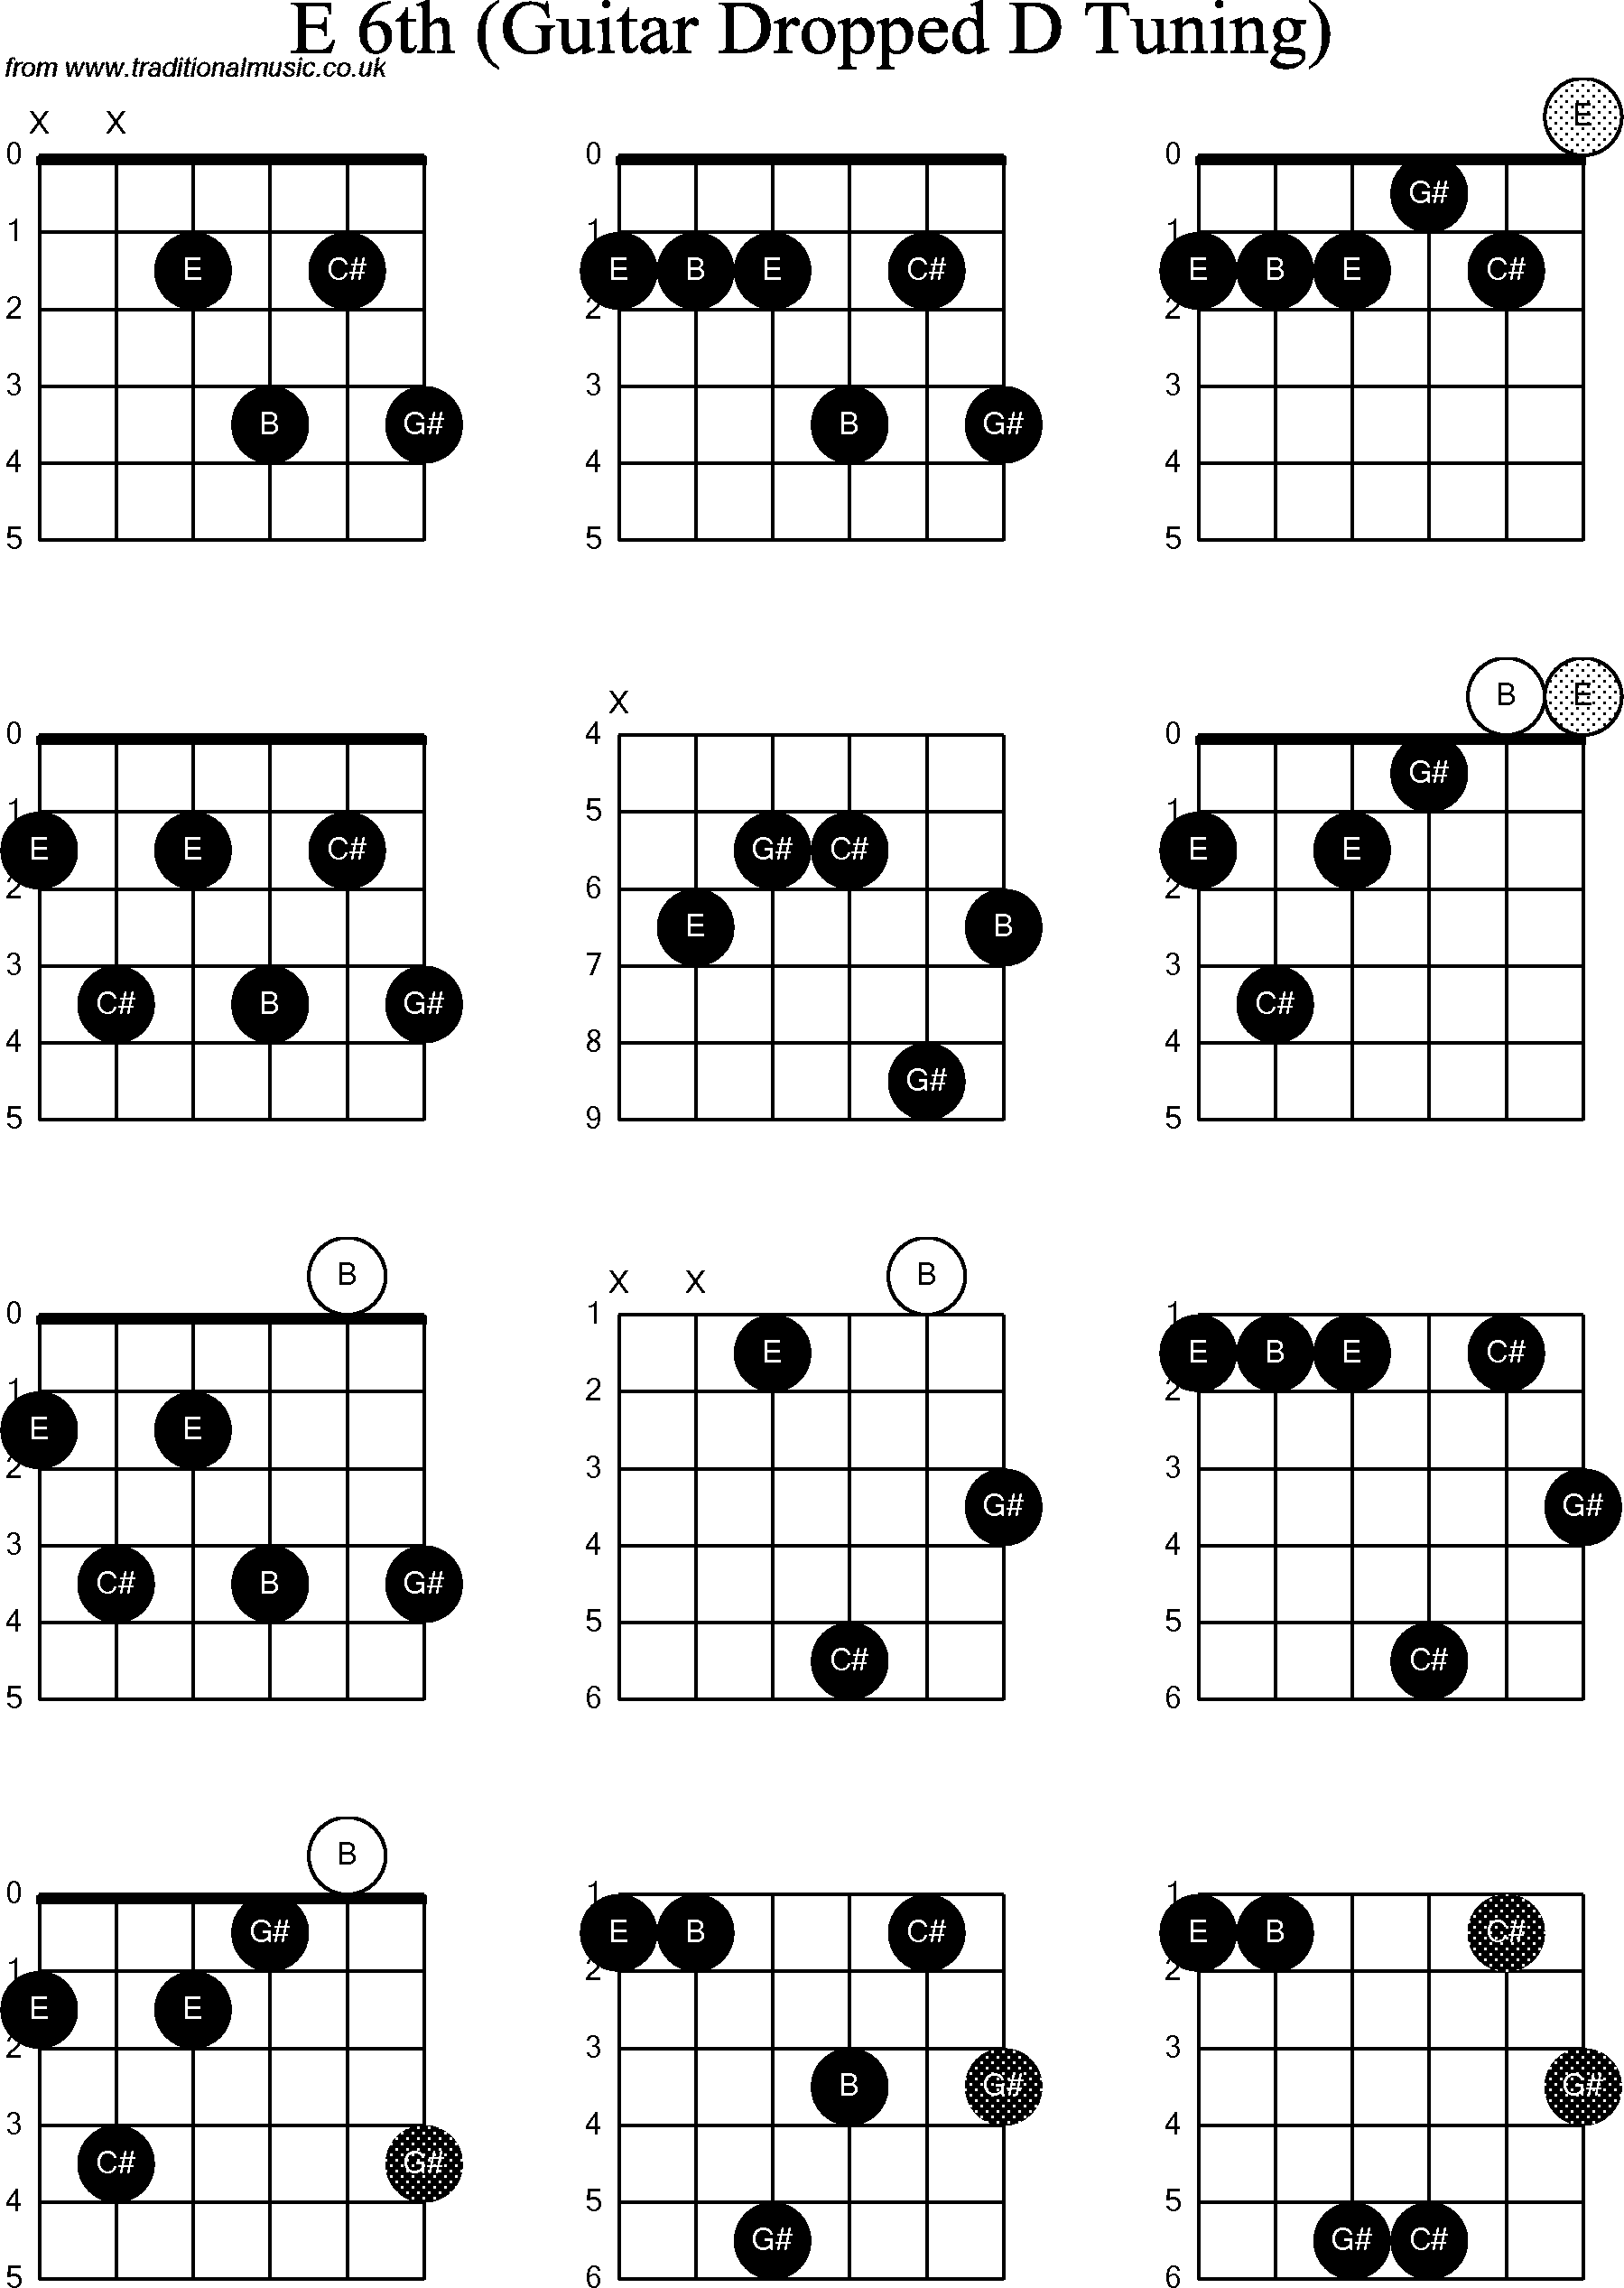 Chord diagrams for dropped D Guitar(DADGBE), E6th